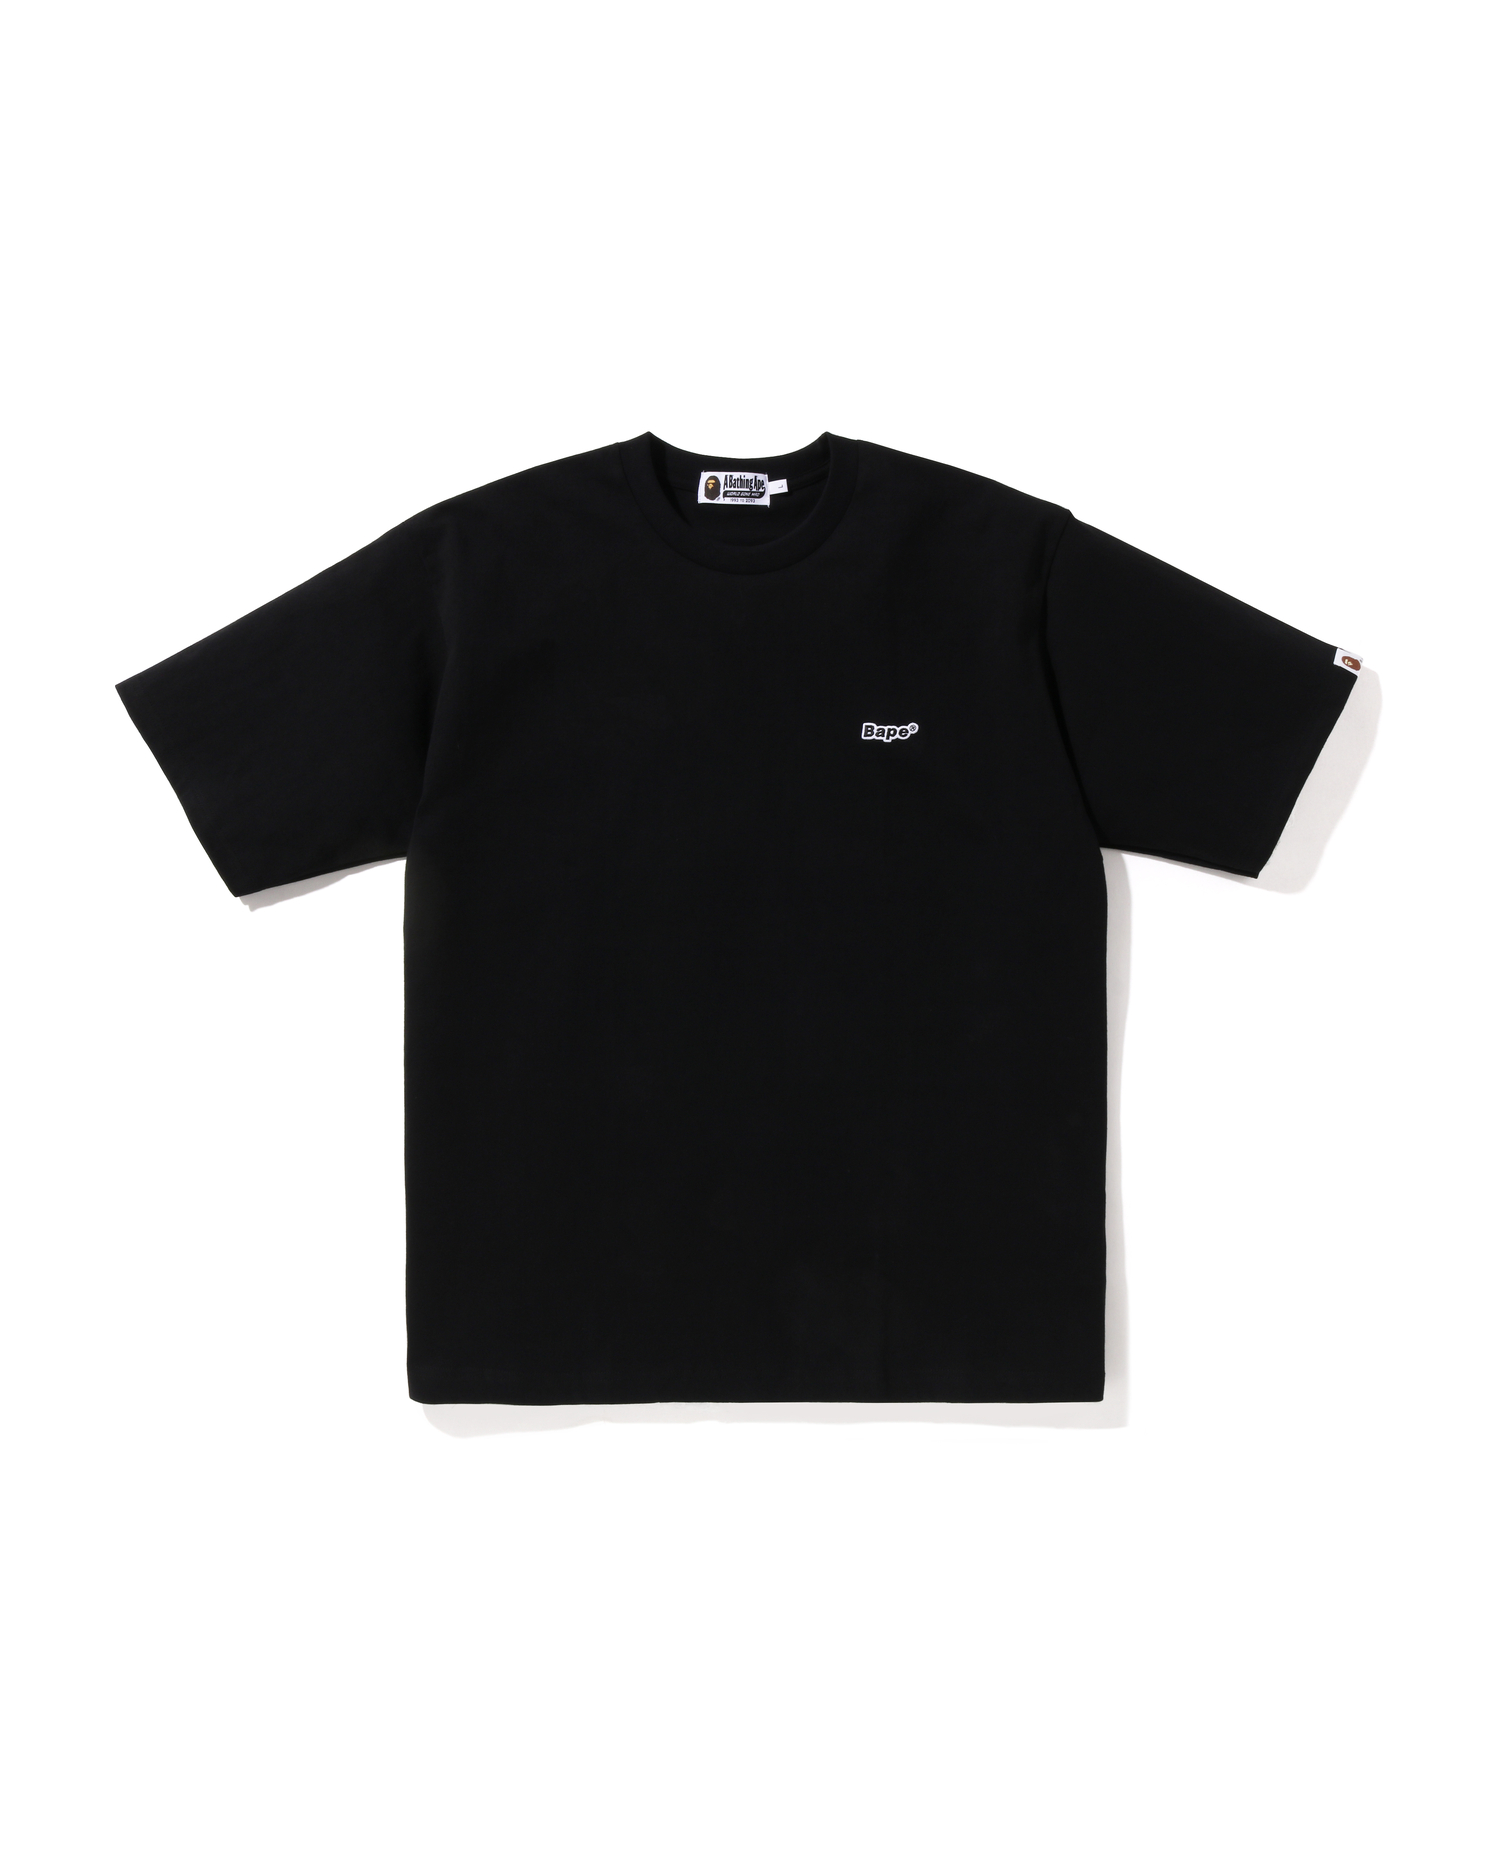 Shop BAPE One Point Relaxed Fit Tee Online   BAPE